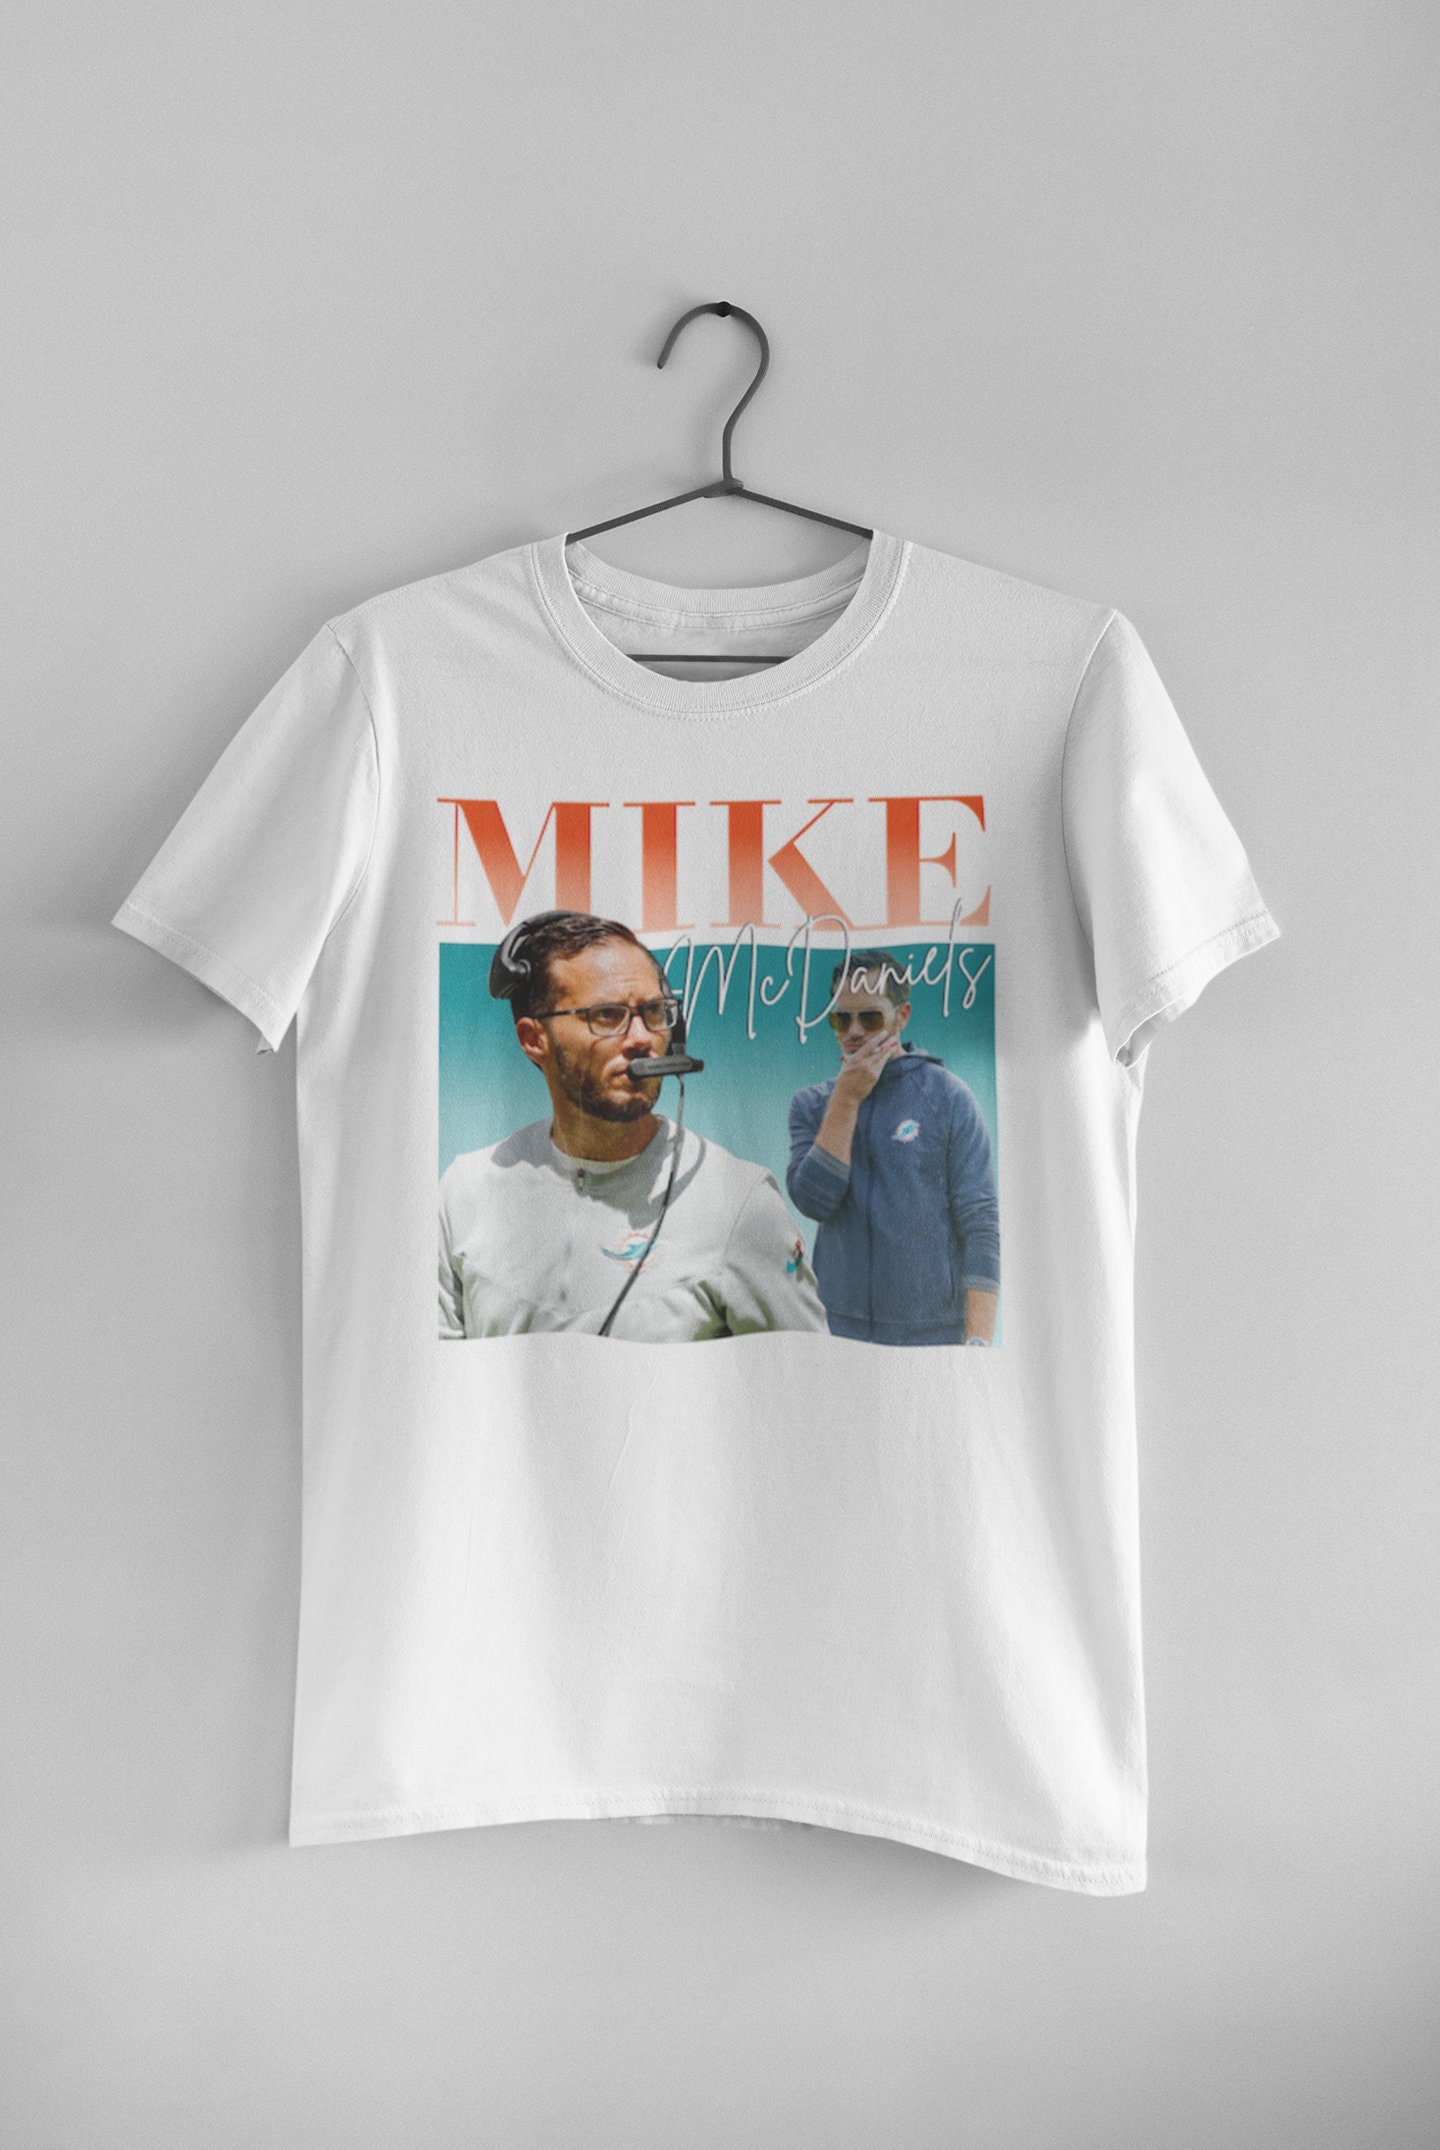 Discover Mike Mcdaniels T Shirt